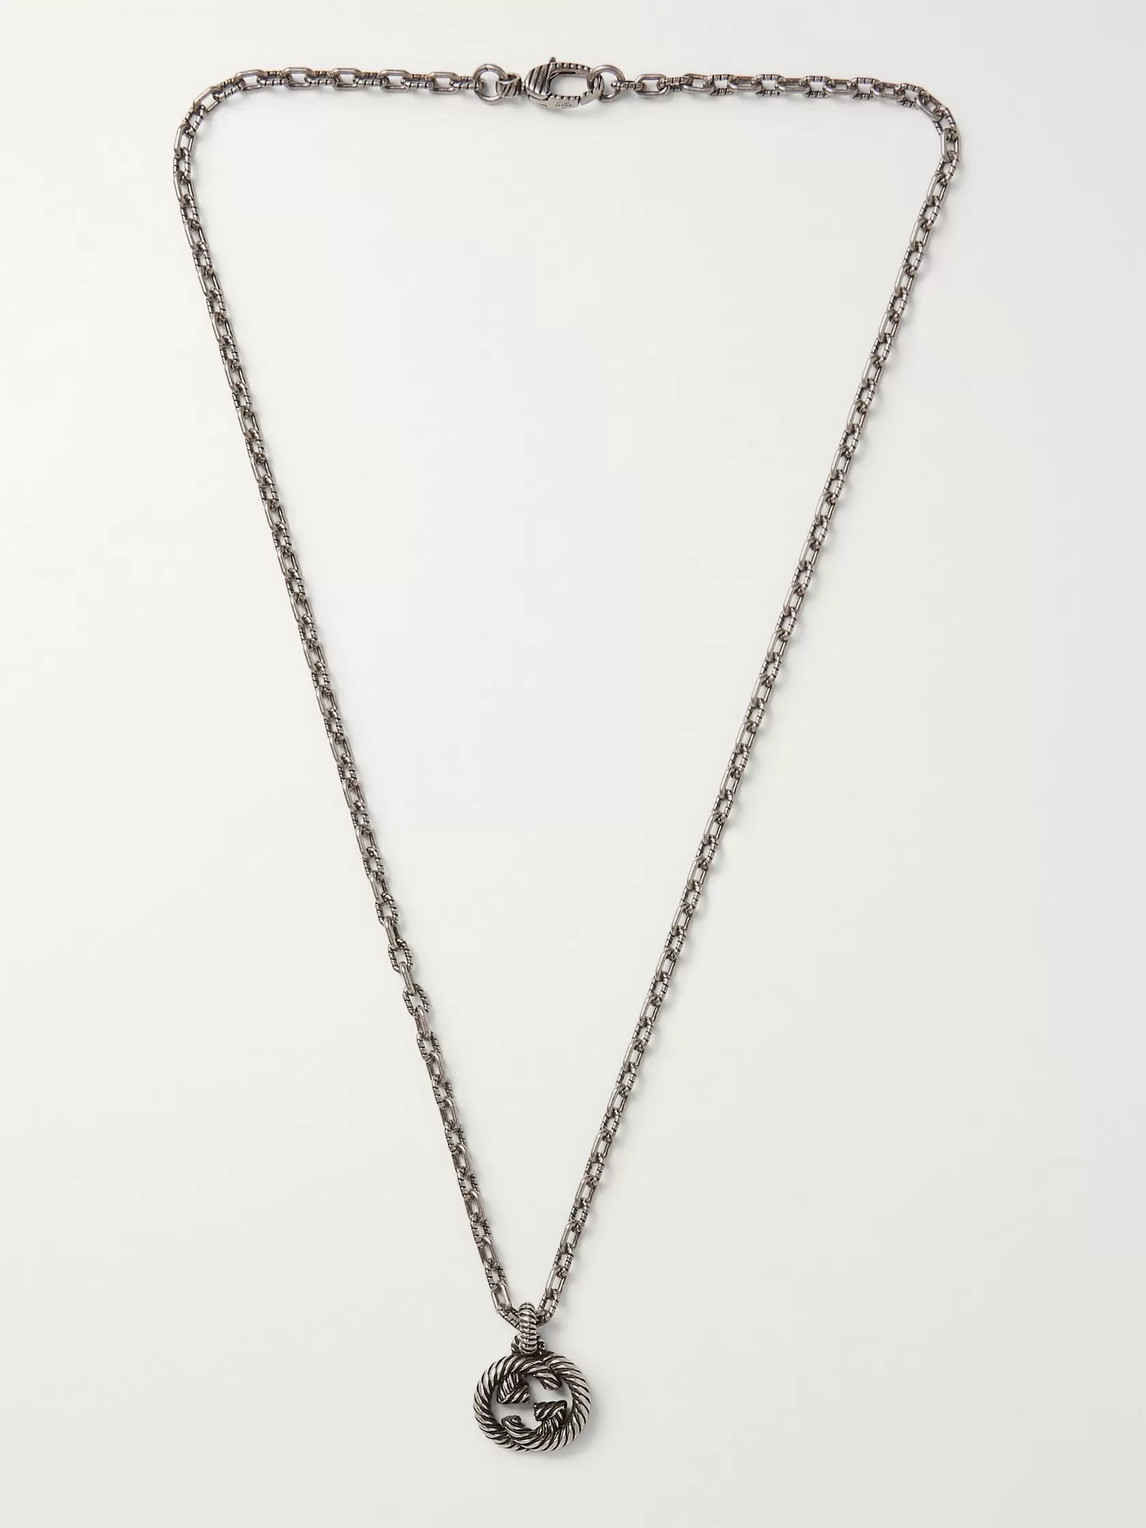 Gucci Engraved Burnished Sterling Silver Necklace